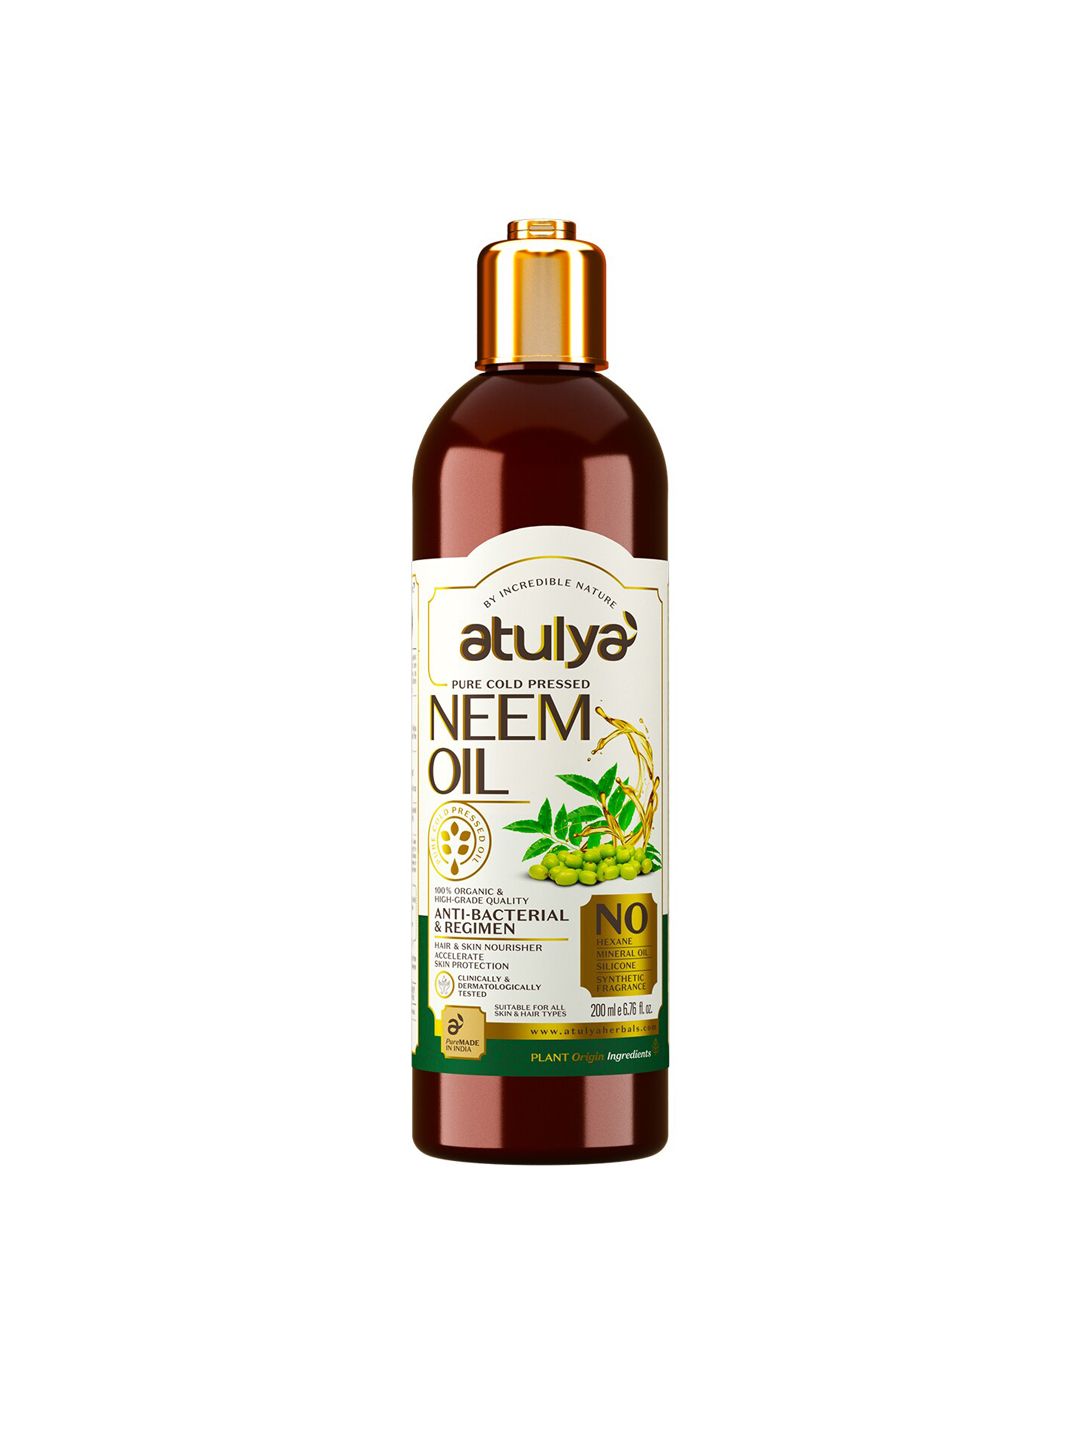 Atulya Neem Cold Pressed Oil 200 ml Price in India